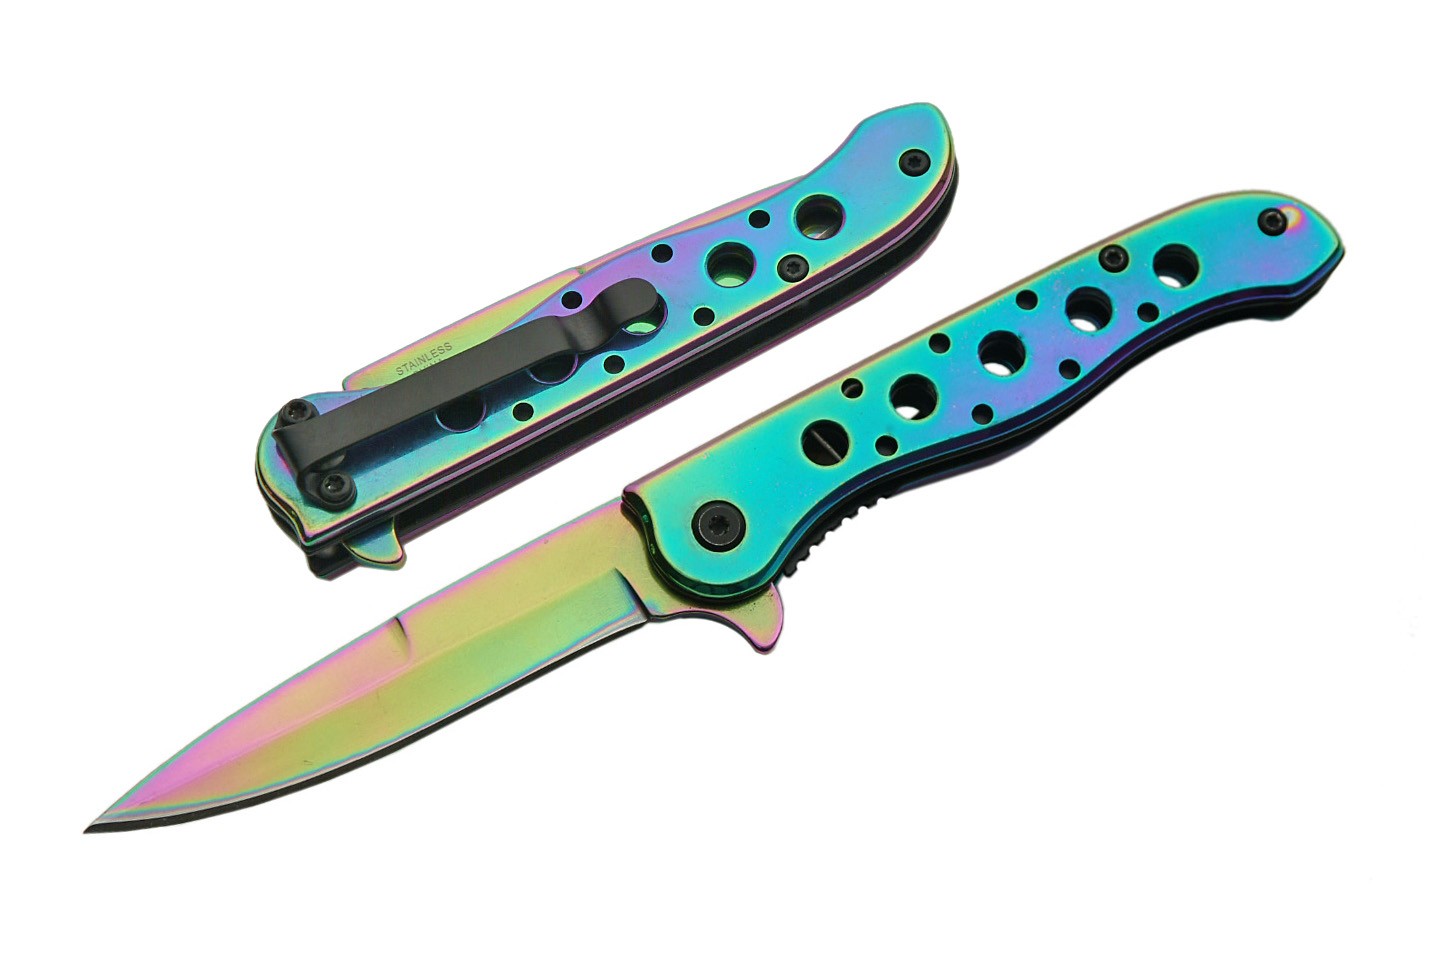 Spring-Assist Folding Pocket Knife 7in. Overall Rainbow Tactical Blade EDC